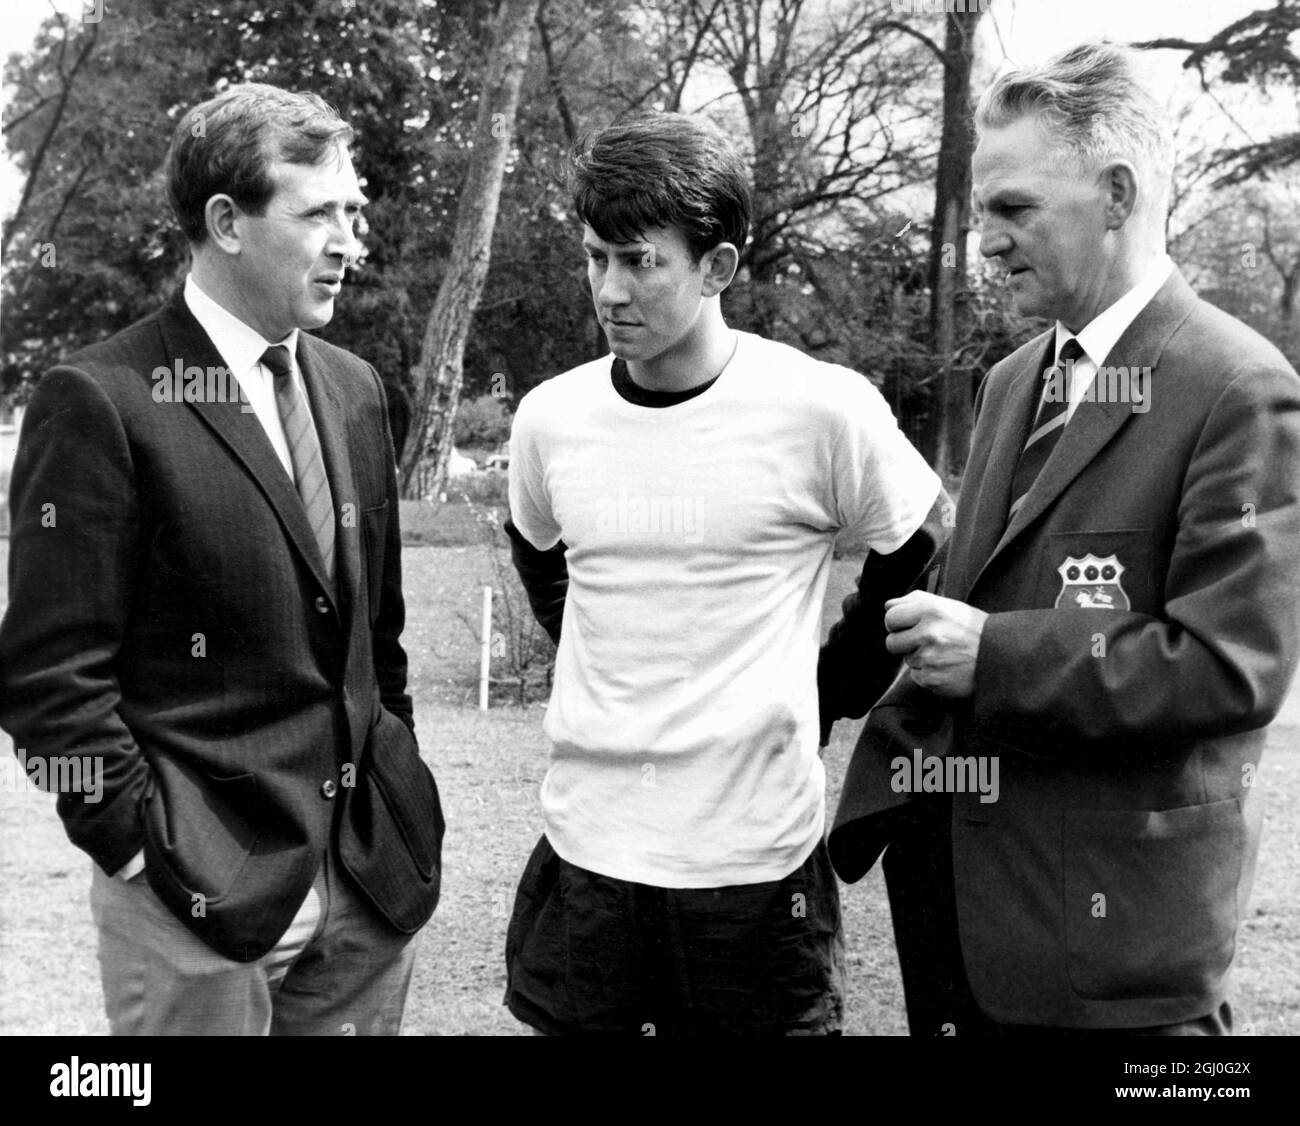 17 year-old Howard Kendall (in white) has been chosen to play left-half for Preston North End in the Cup Final against West Ham United. He gets some advice from Danny Blanchflower (left) and Jimmy Milne, Preston's manager (right). 30th April 1964 Stock Photo